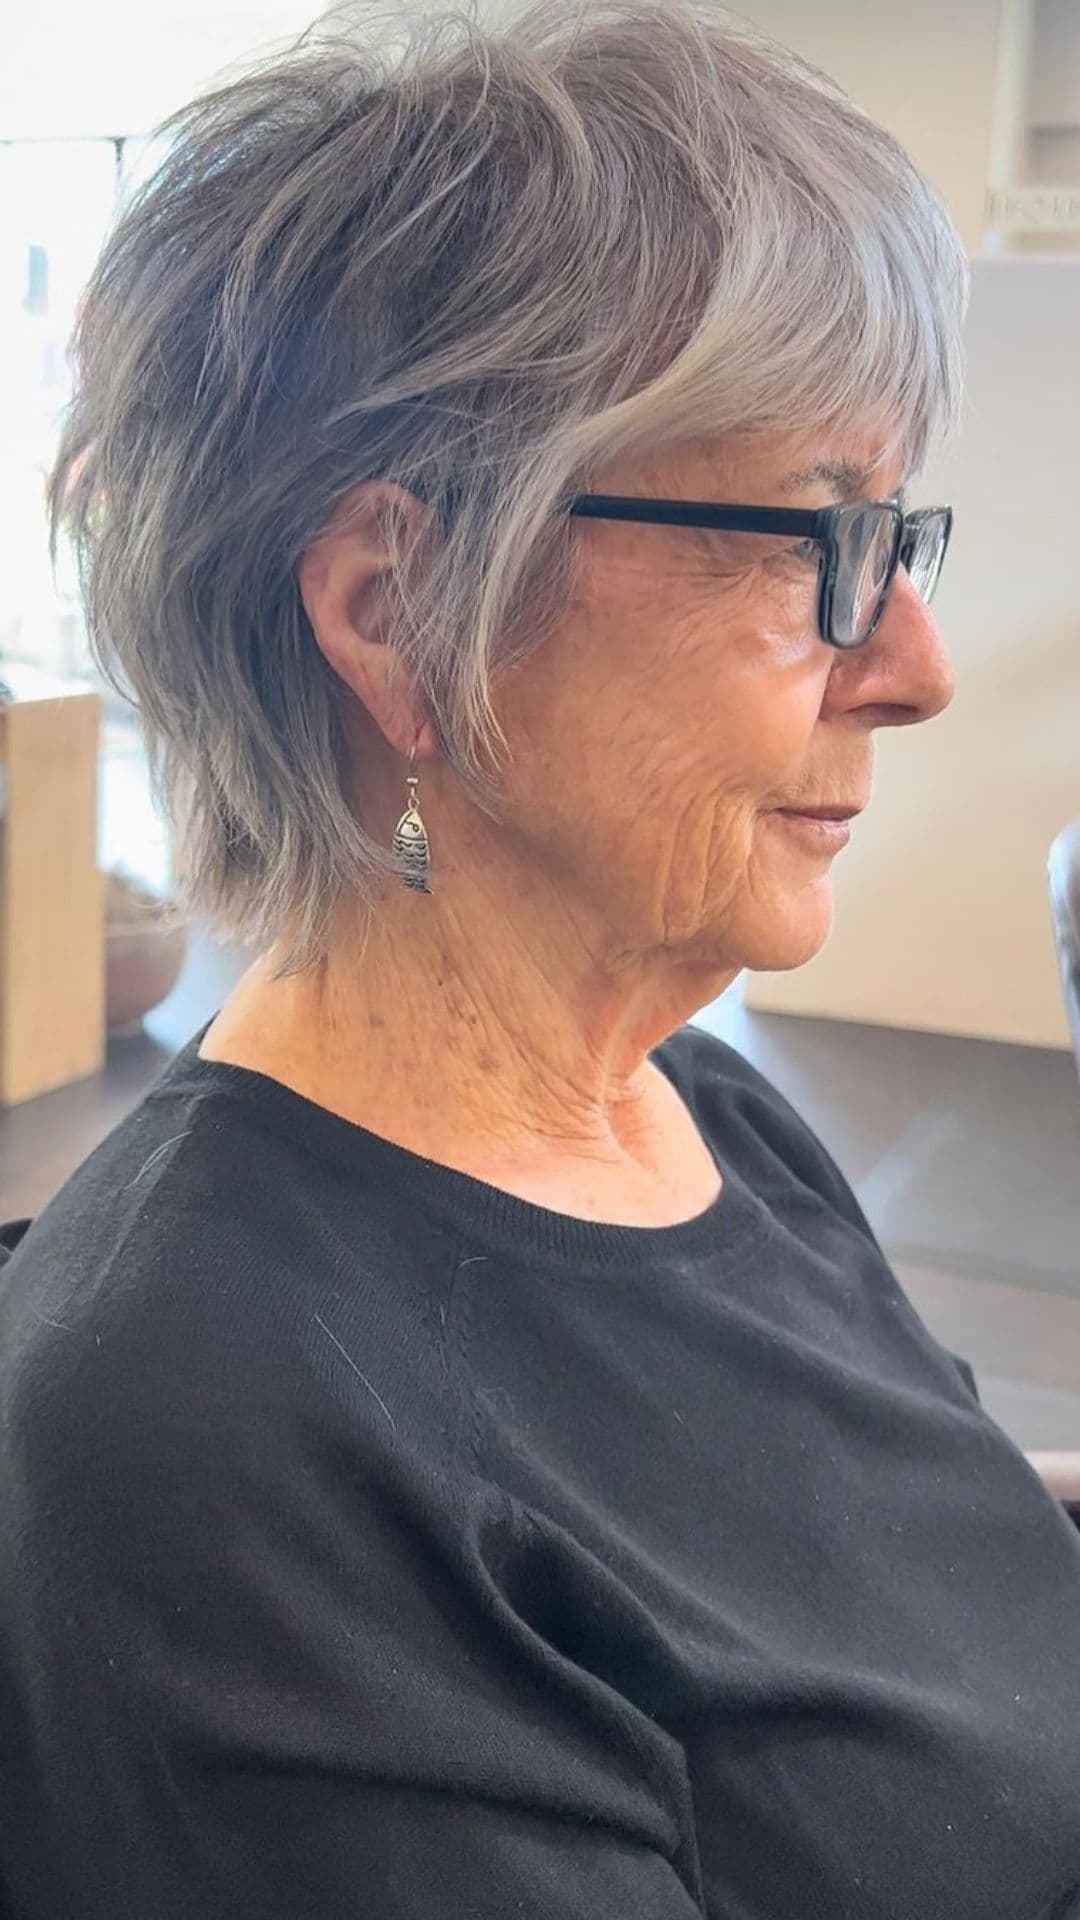 An older woman modelling a pixie shag hairstyle.